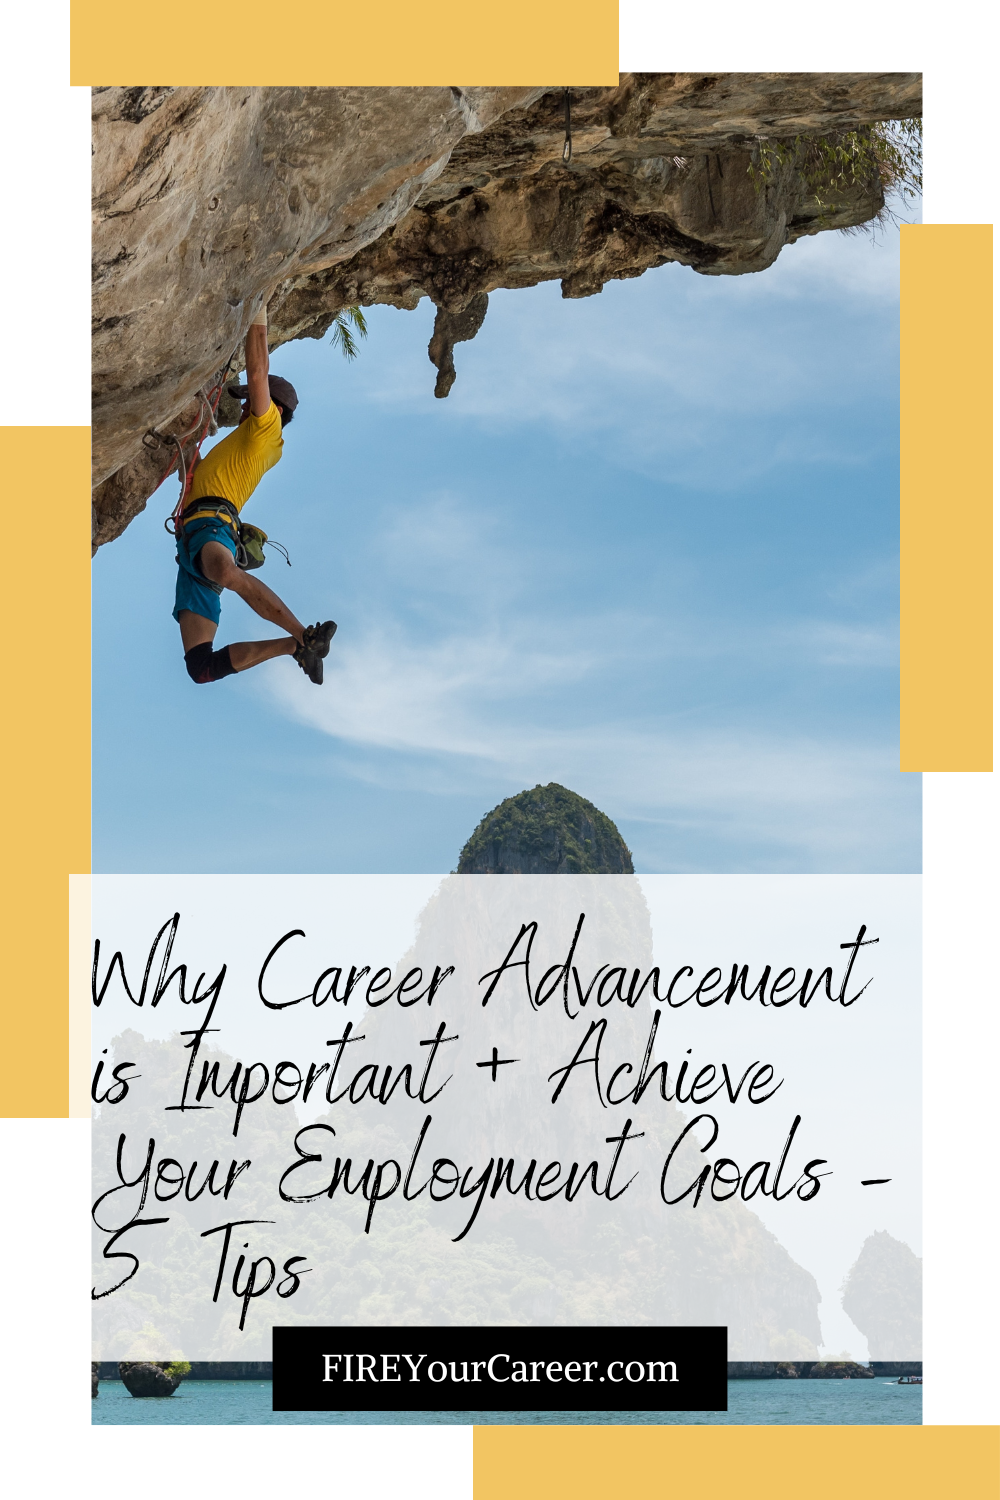 Why Career Advancement is Important + Achieve Your Employment Goals – 5 Tips Pinterest